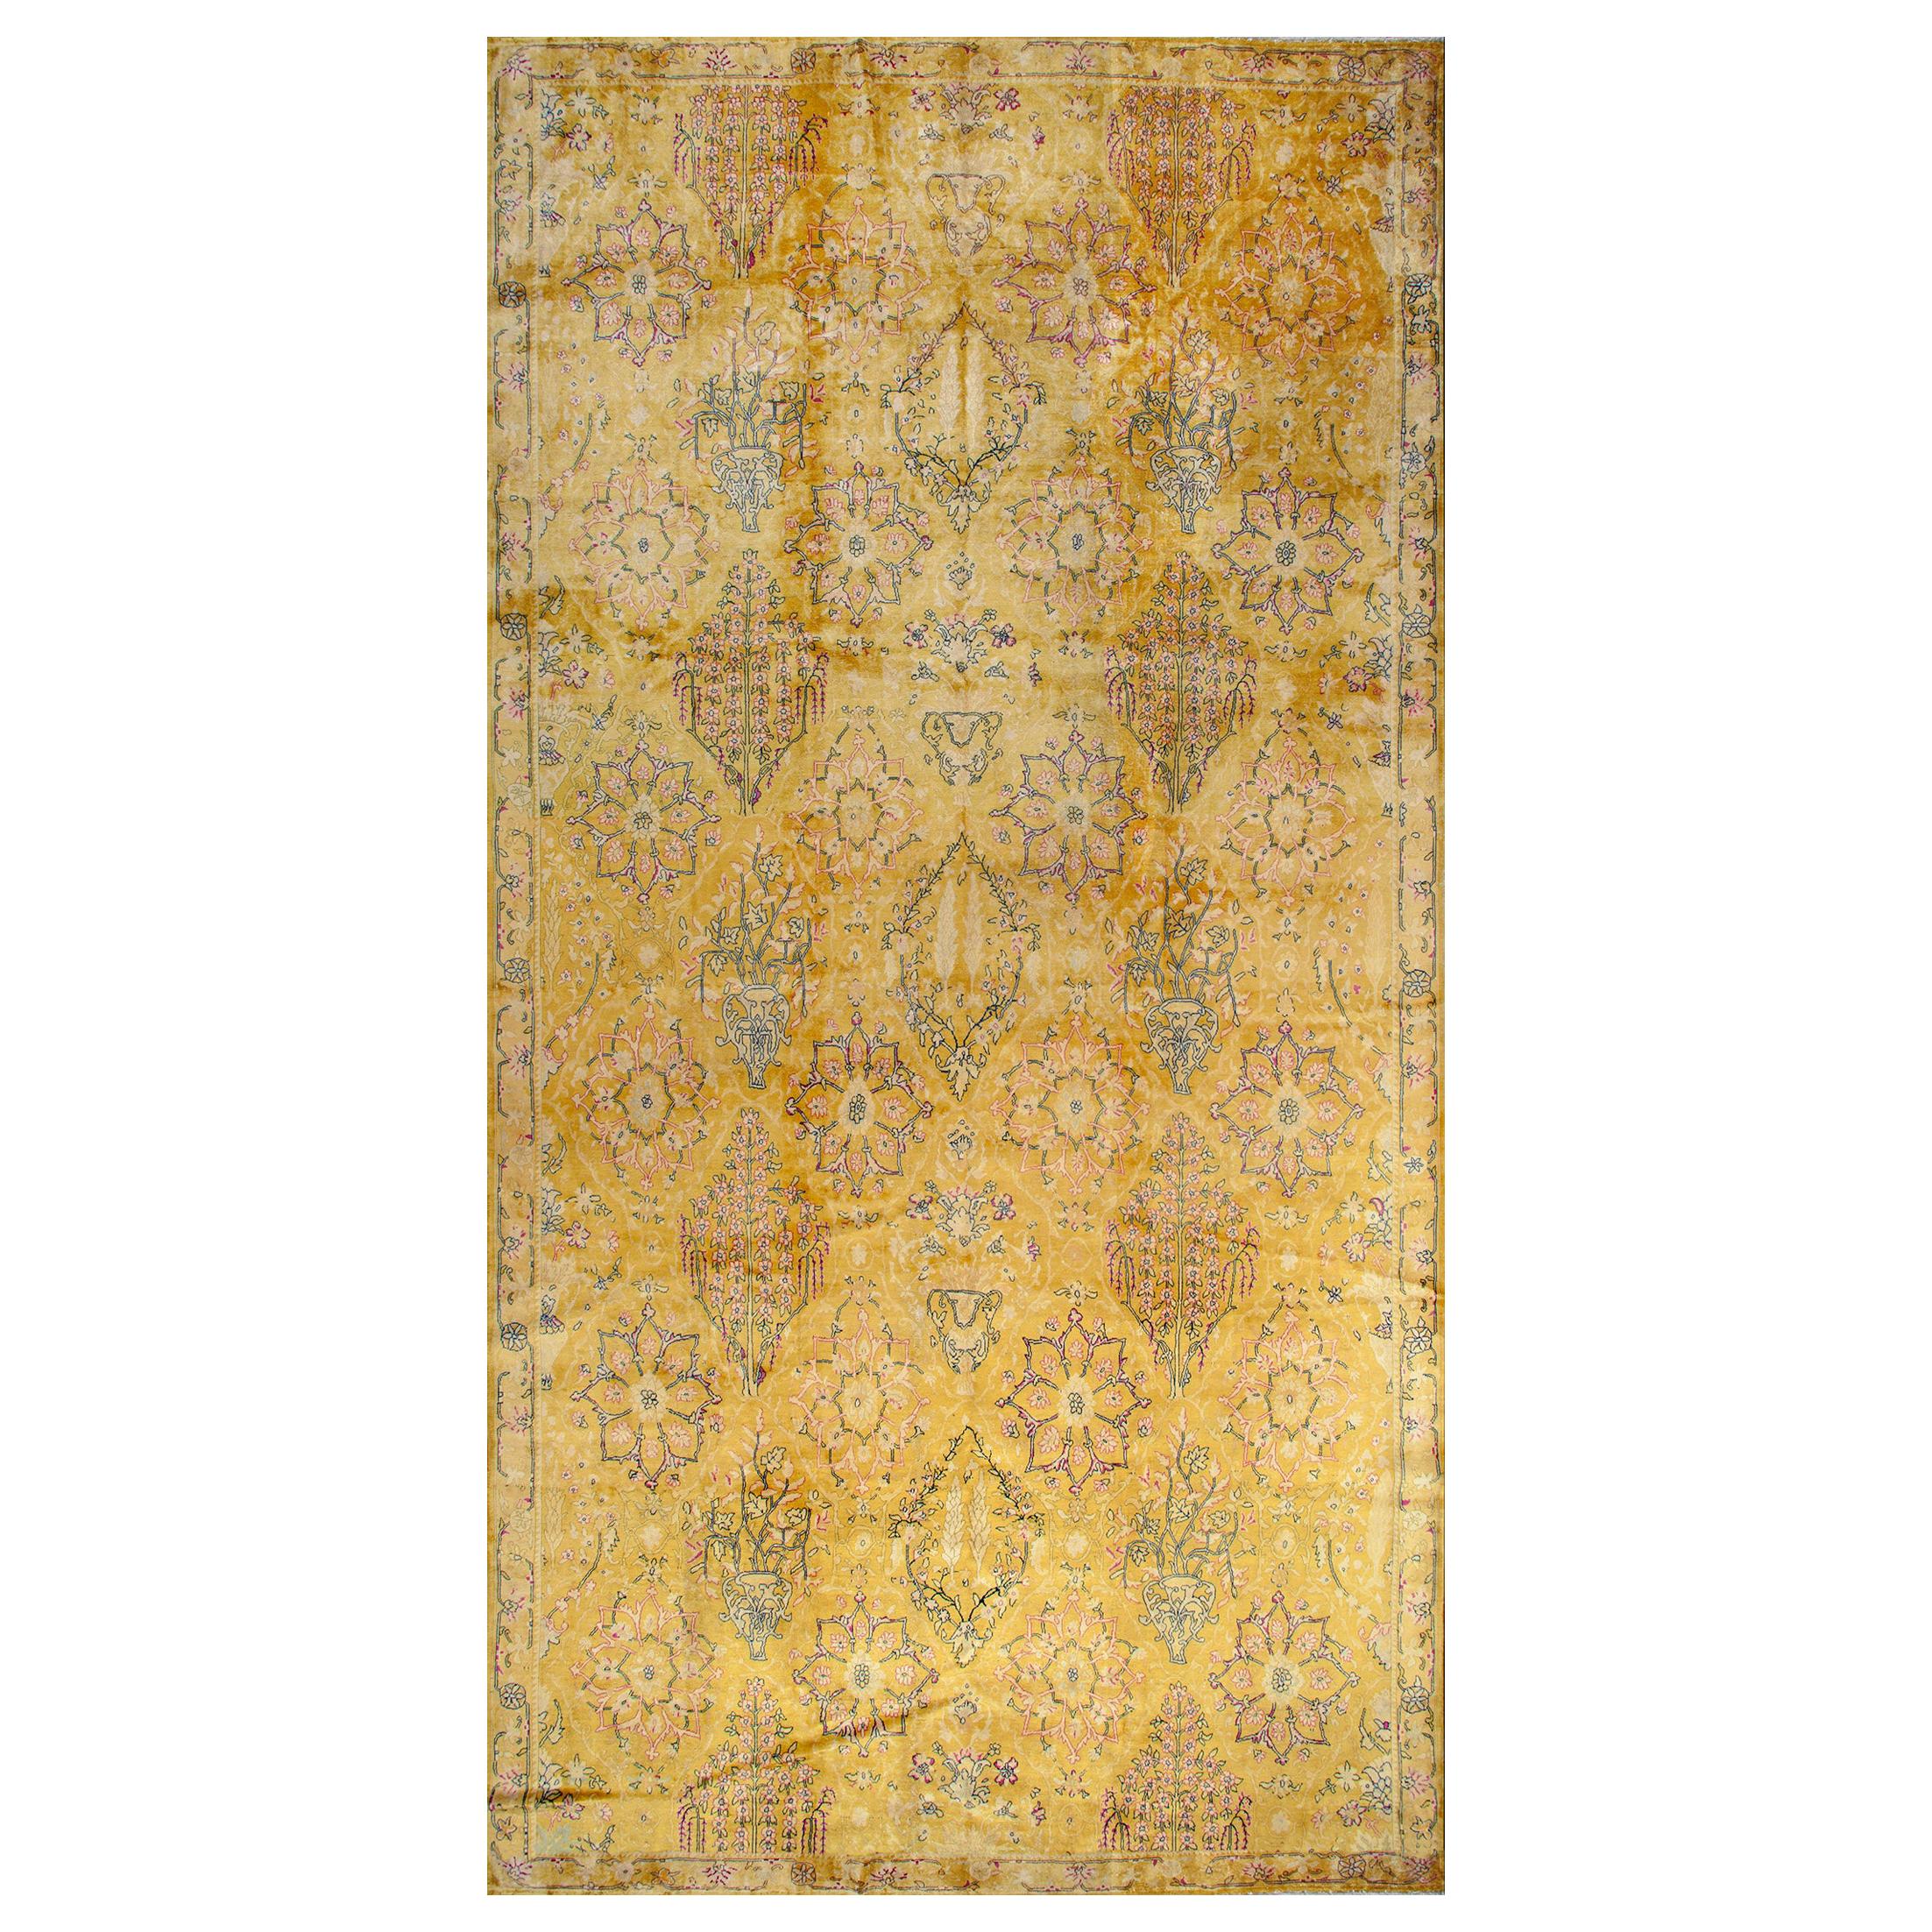 Early 20th Century Indian Lahore Carpet ( 11' x 22'4" - 335 x 680 cm )